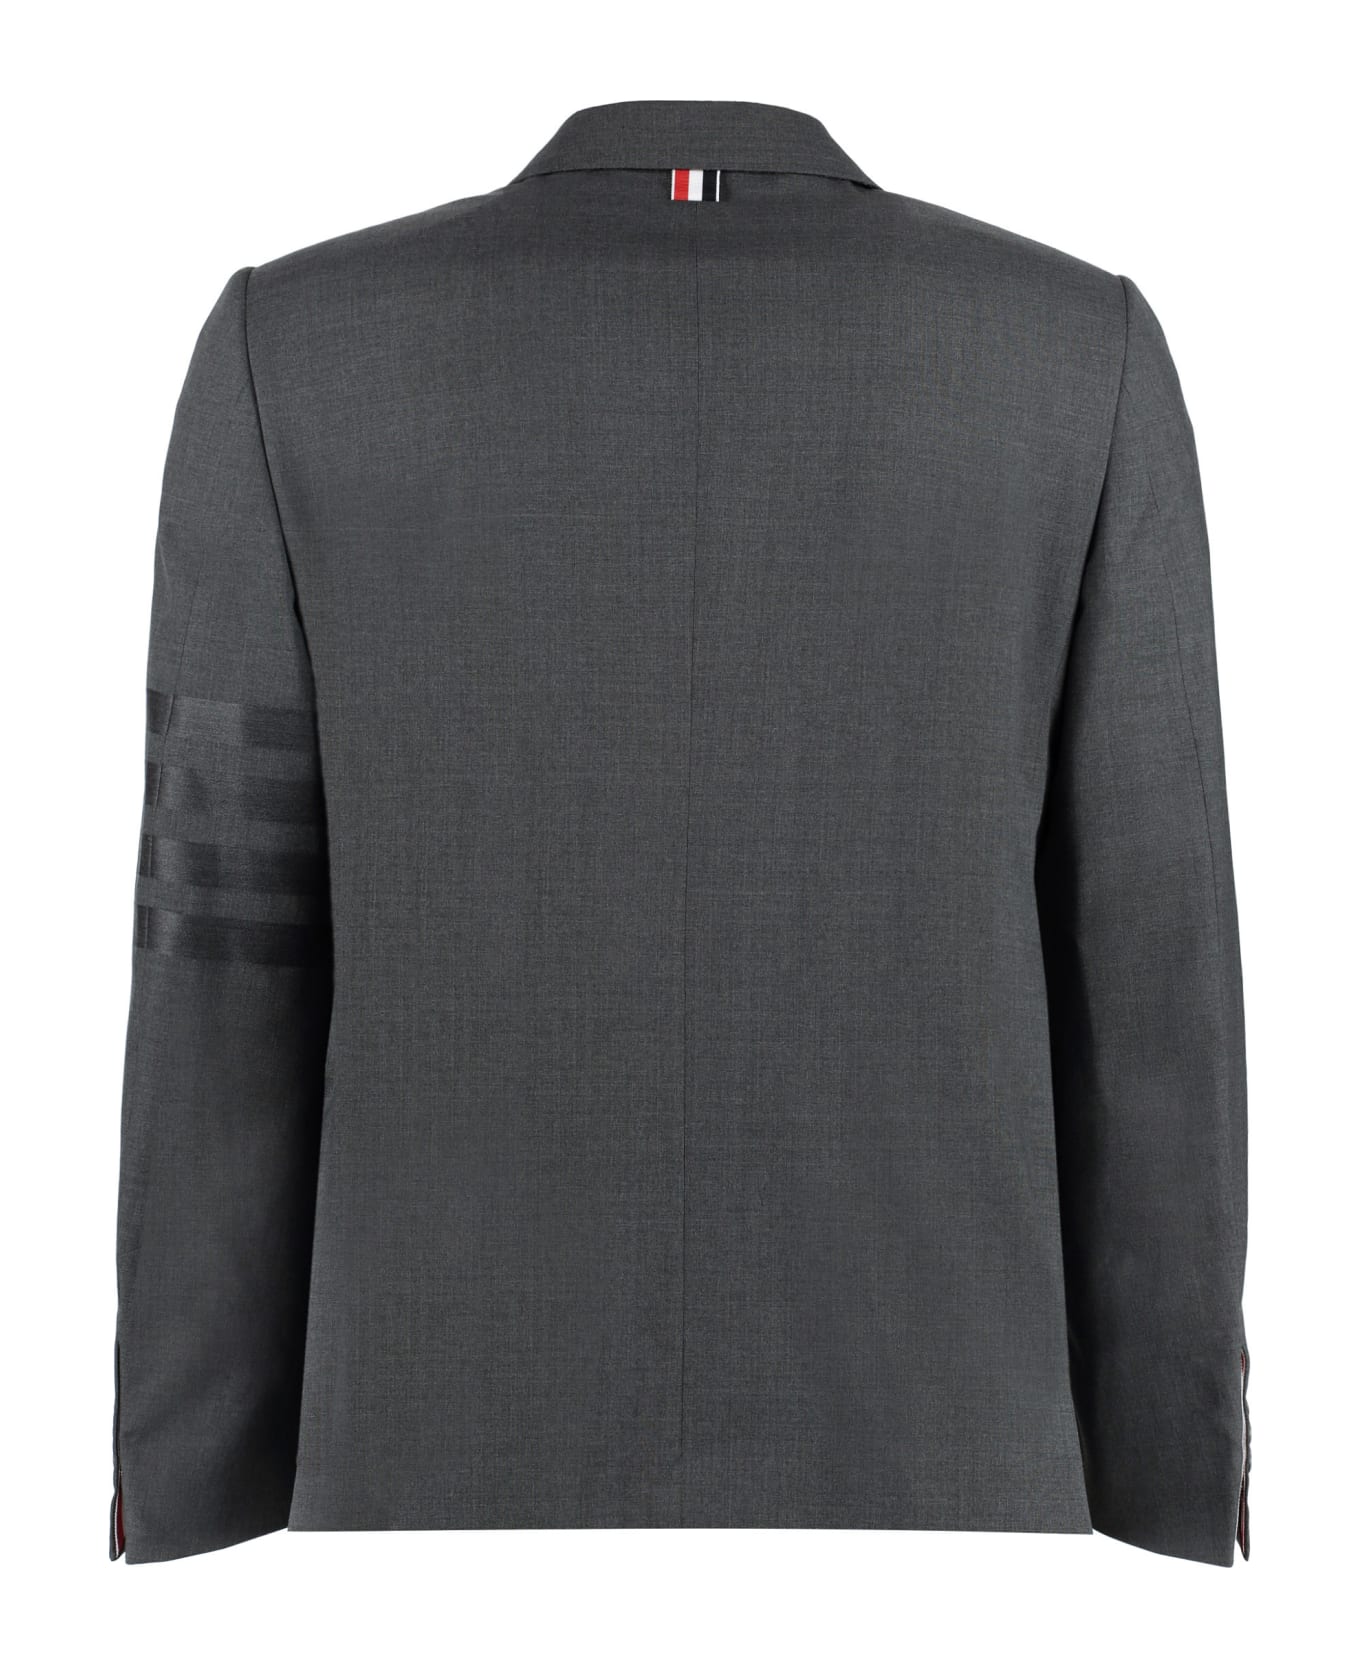 Thom Browne Single-breasted Two-button Jacket - grey